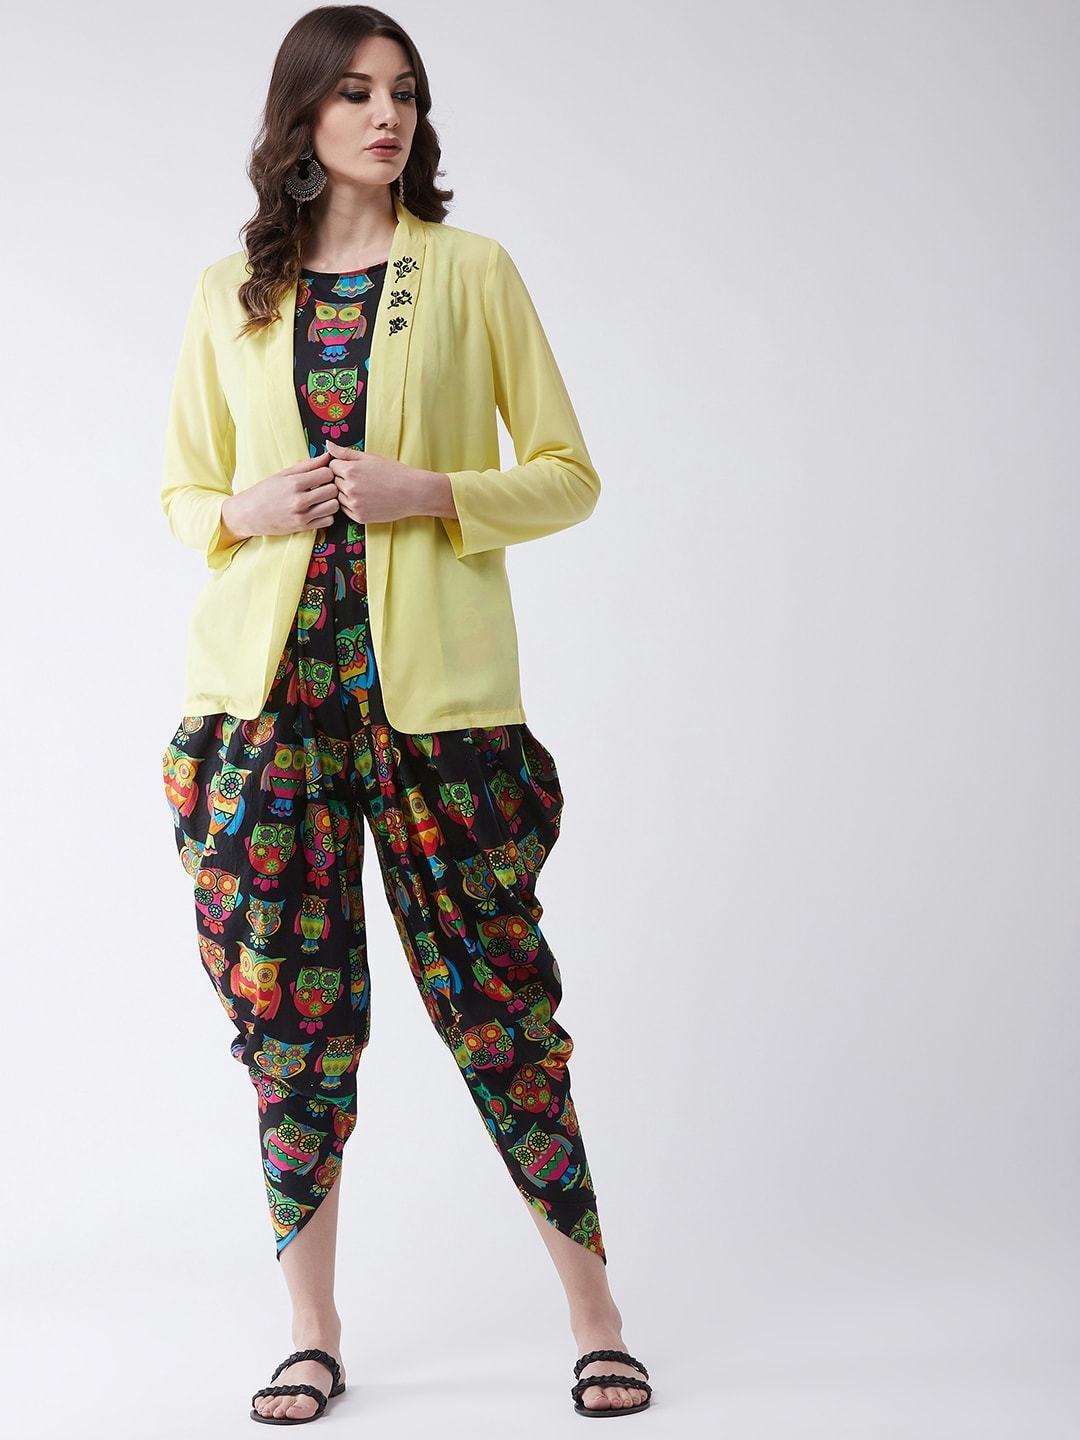 Women's Quirky Owl Printed Jumpsuit with Embroidered Shrug - Pannkh